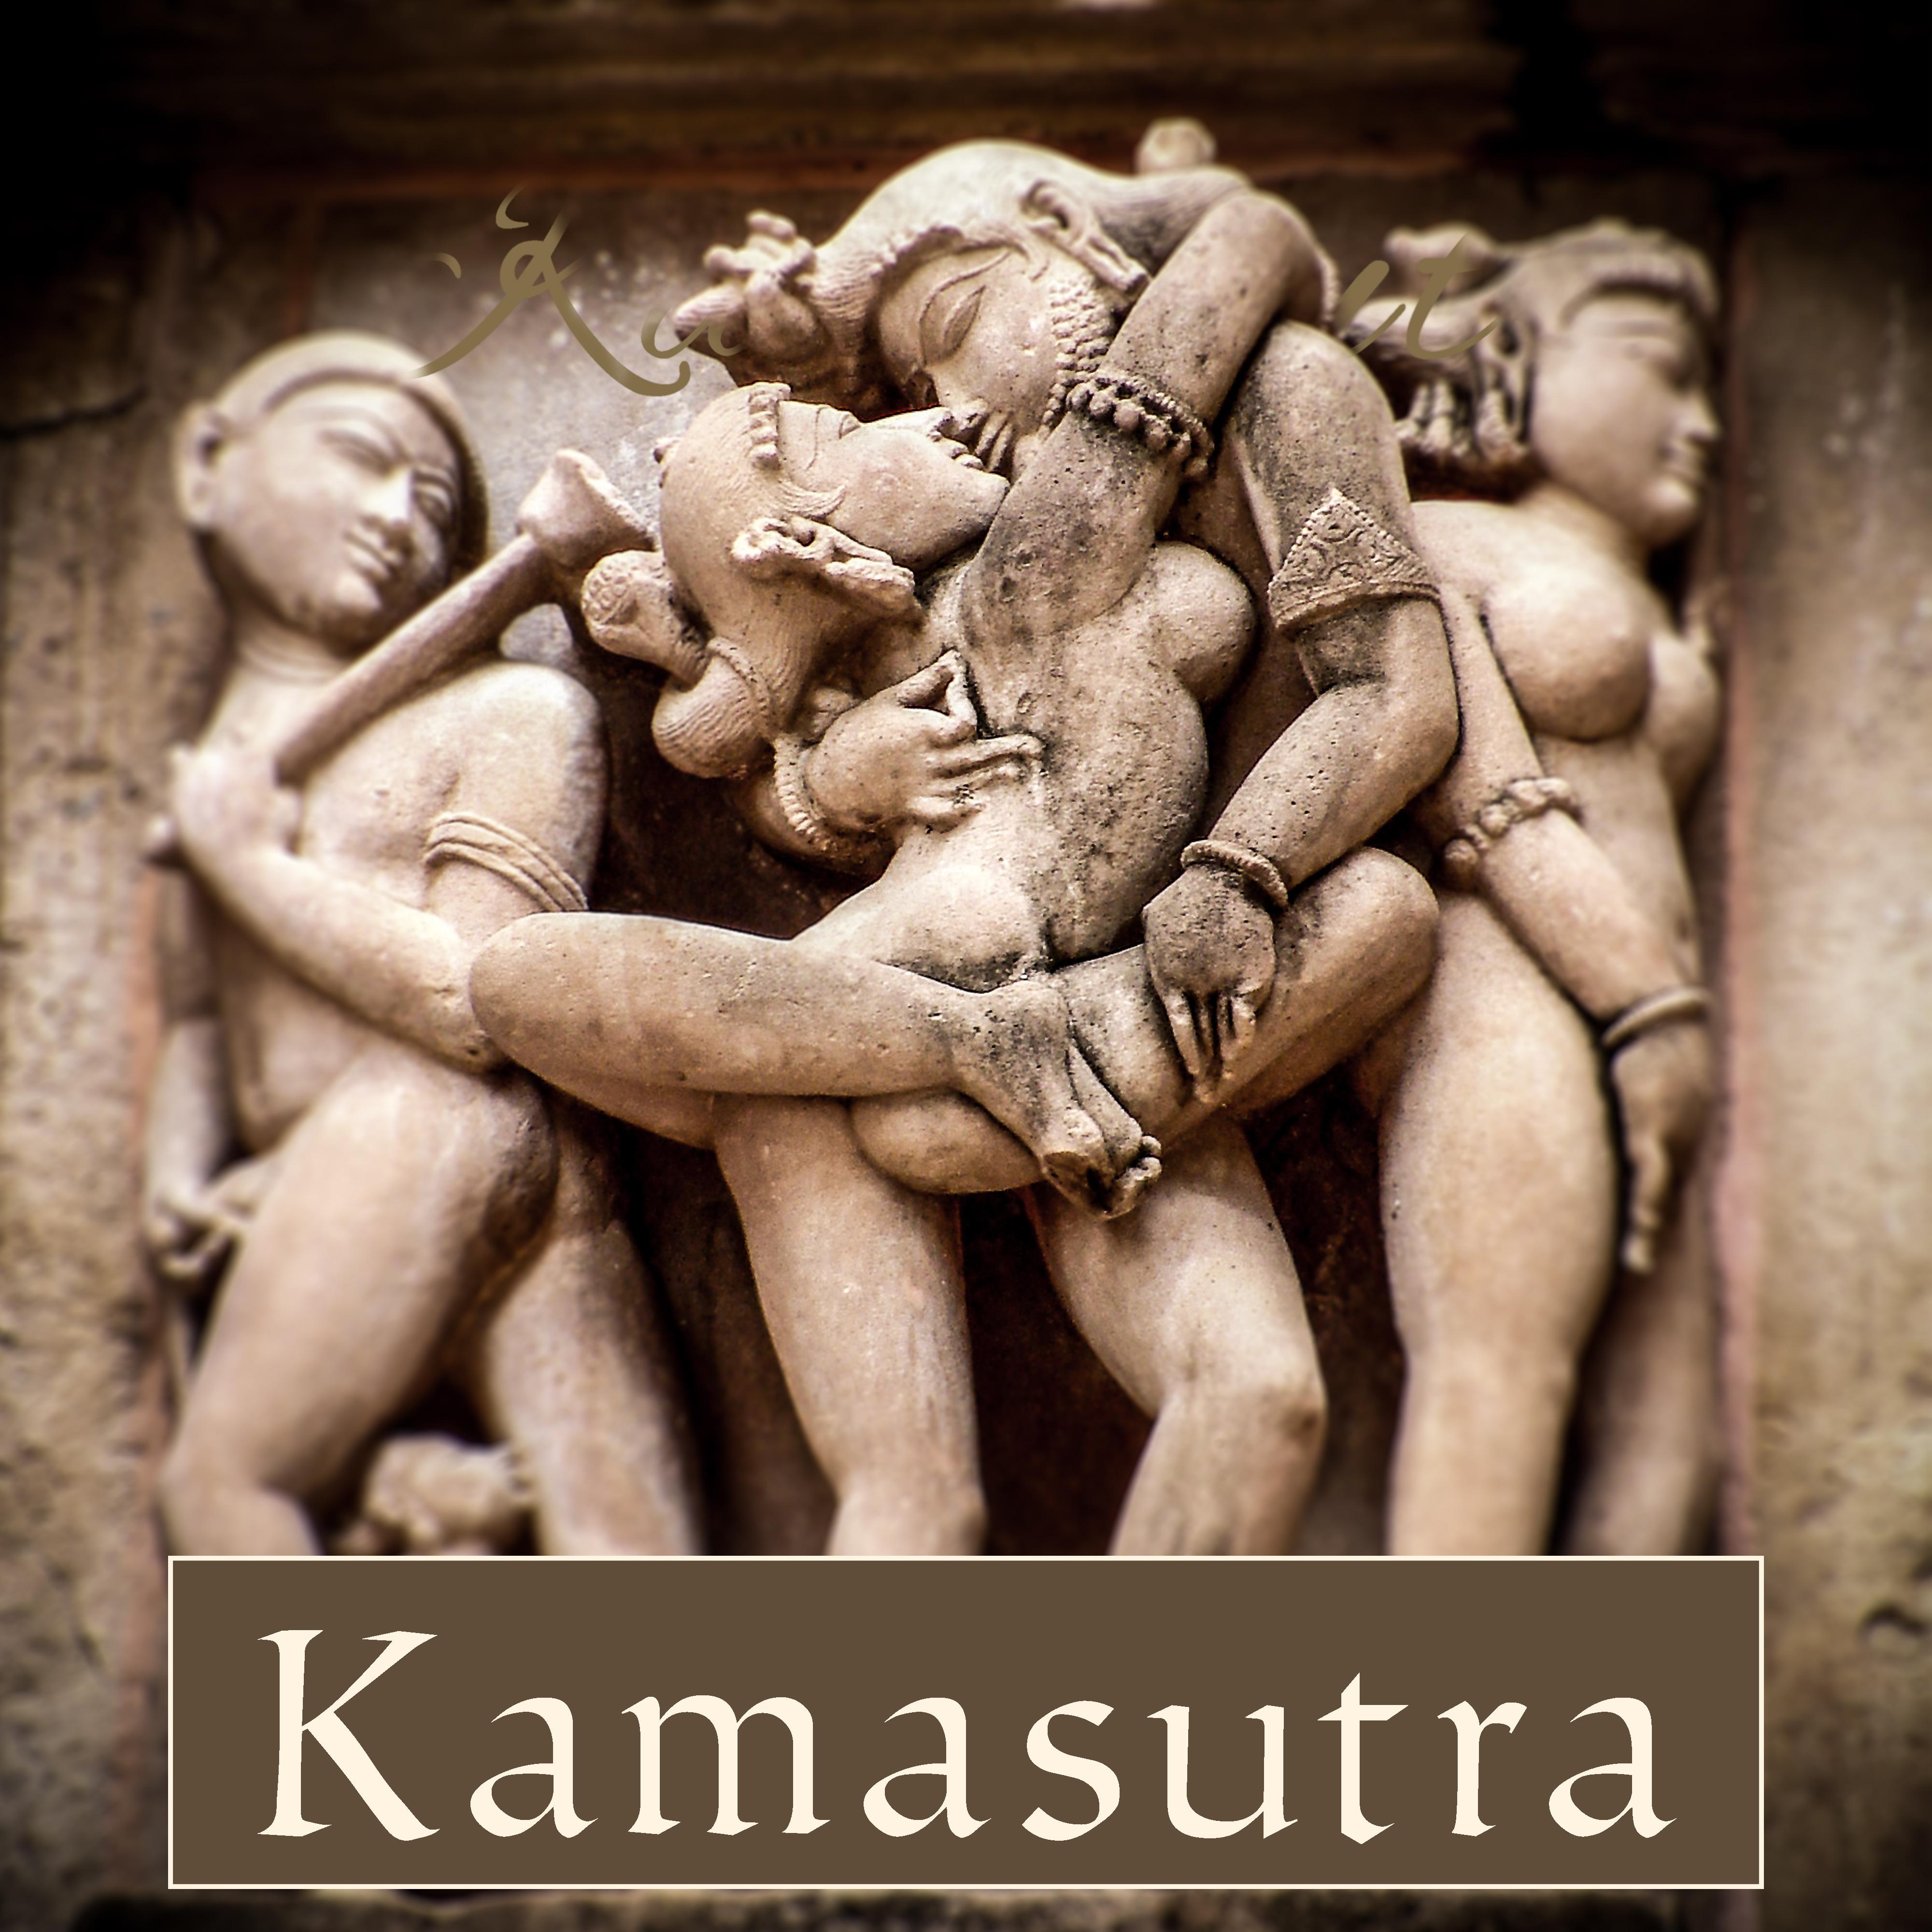 Kamasutra – Erotic Music for ***, Tantric Massage, Fancy Games, Getting Close, Making Love, Deep Orgasm, Chill Out